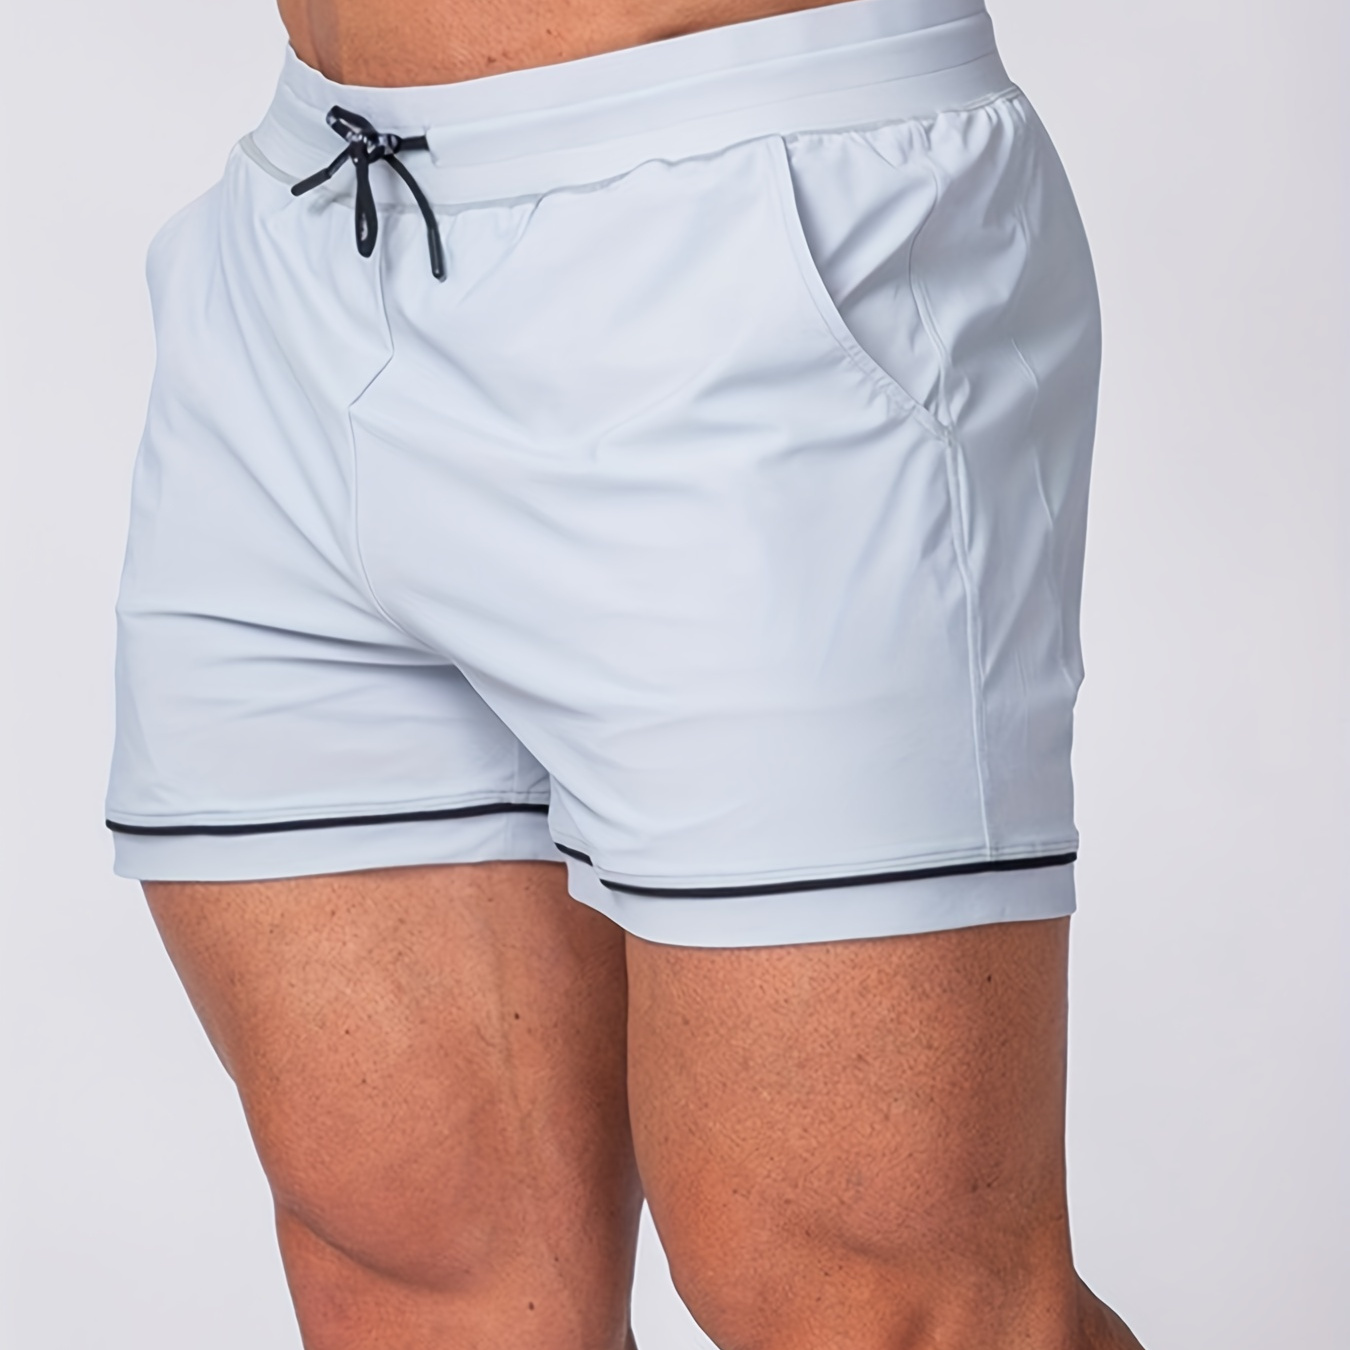 

Quick Dry Men's Sport Shorts - Moisture Wicking, Stretchy, And Perfect For Beach, Cycling, Fitness, And Outdoor Activities